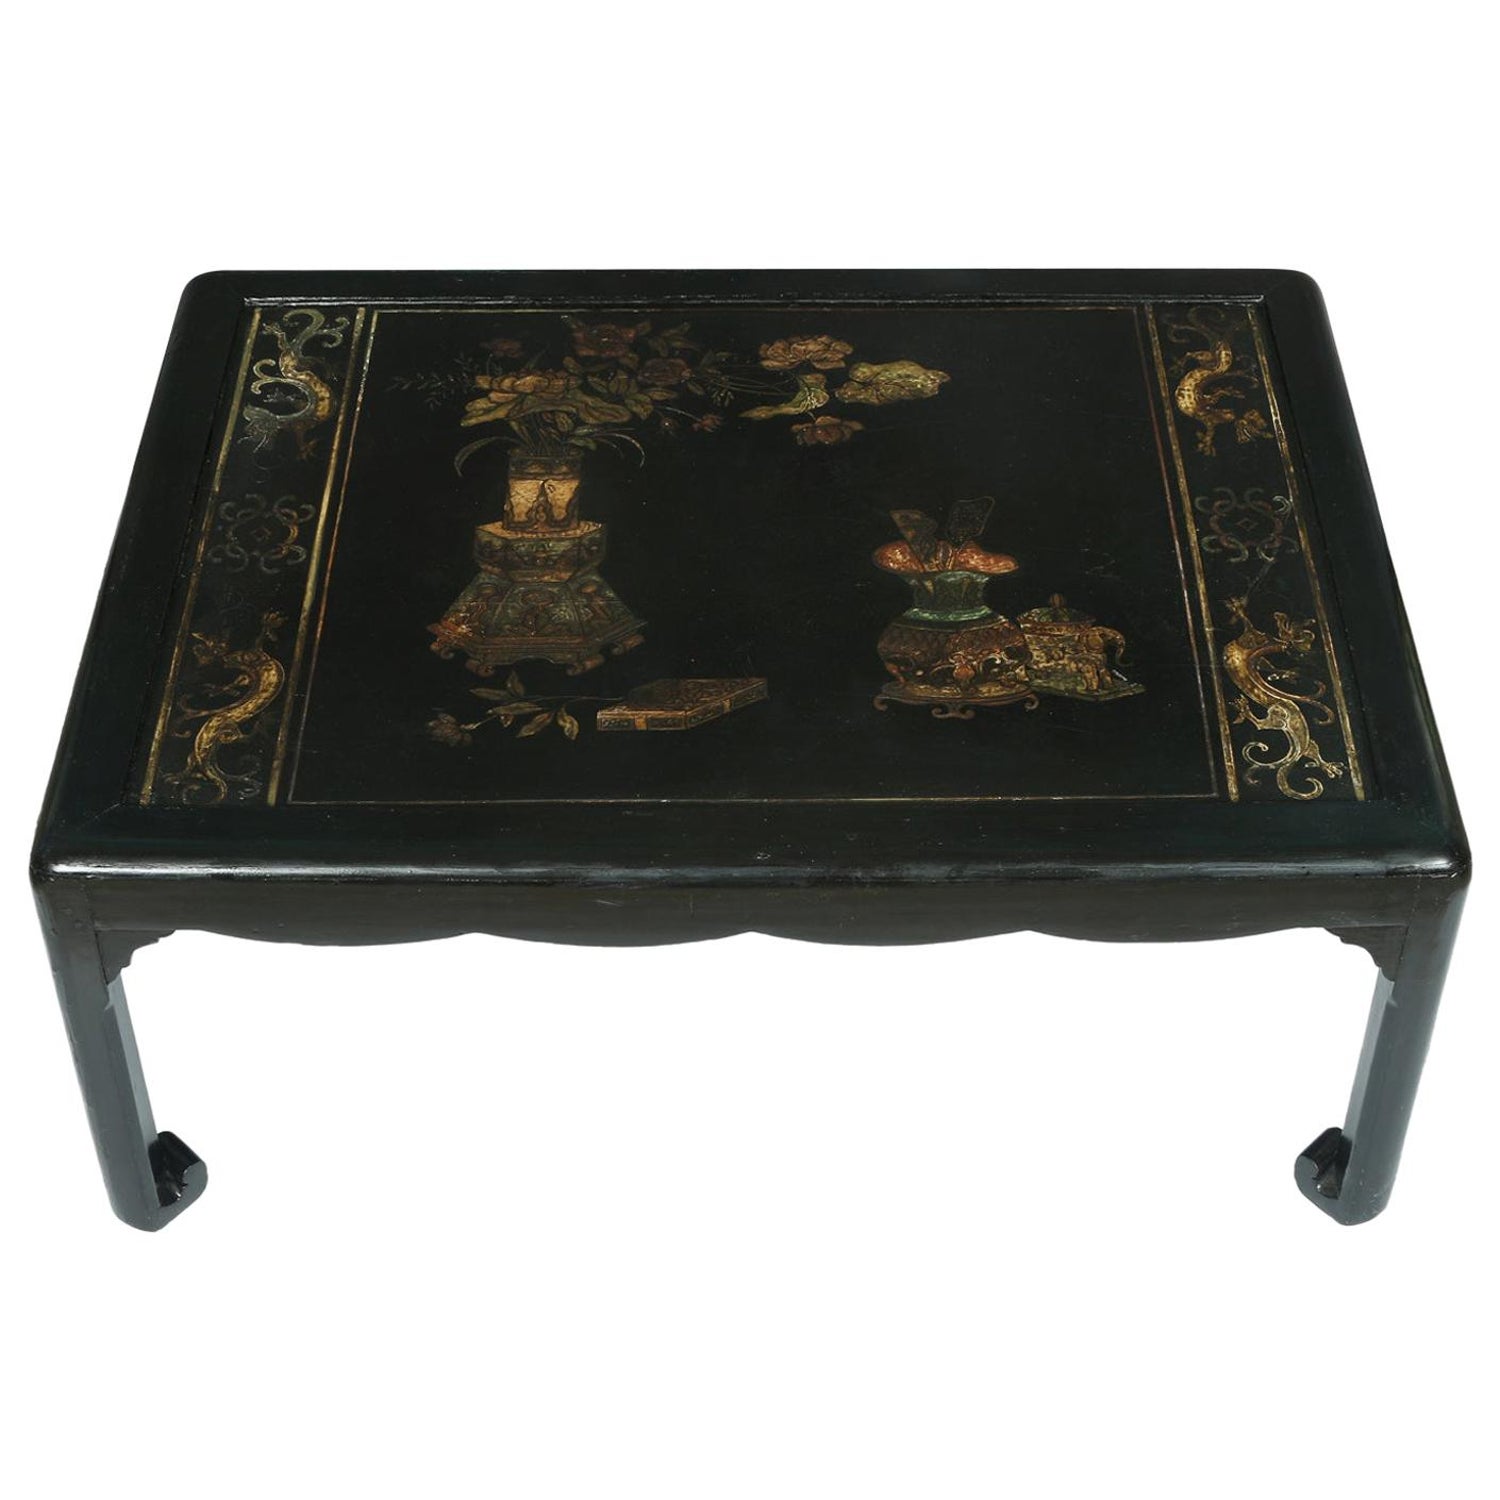 https://a.1stdibscdn.com/chinese-wood-coffee-table-with-chinoiserie-lacquer-decoration-for-sale/1121189/f_206095721600416854219/20609572_master.jpg?width=1500